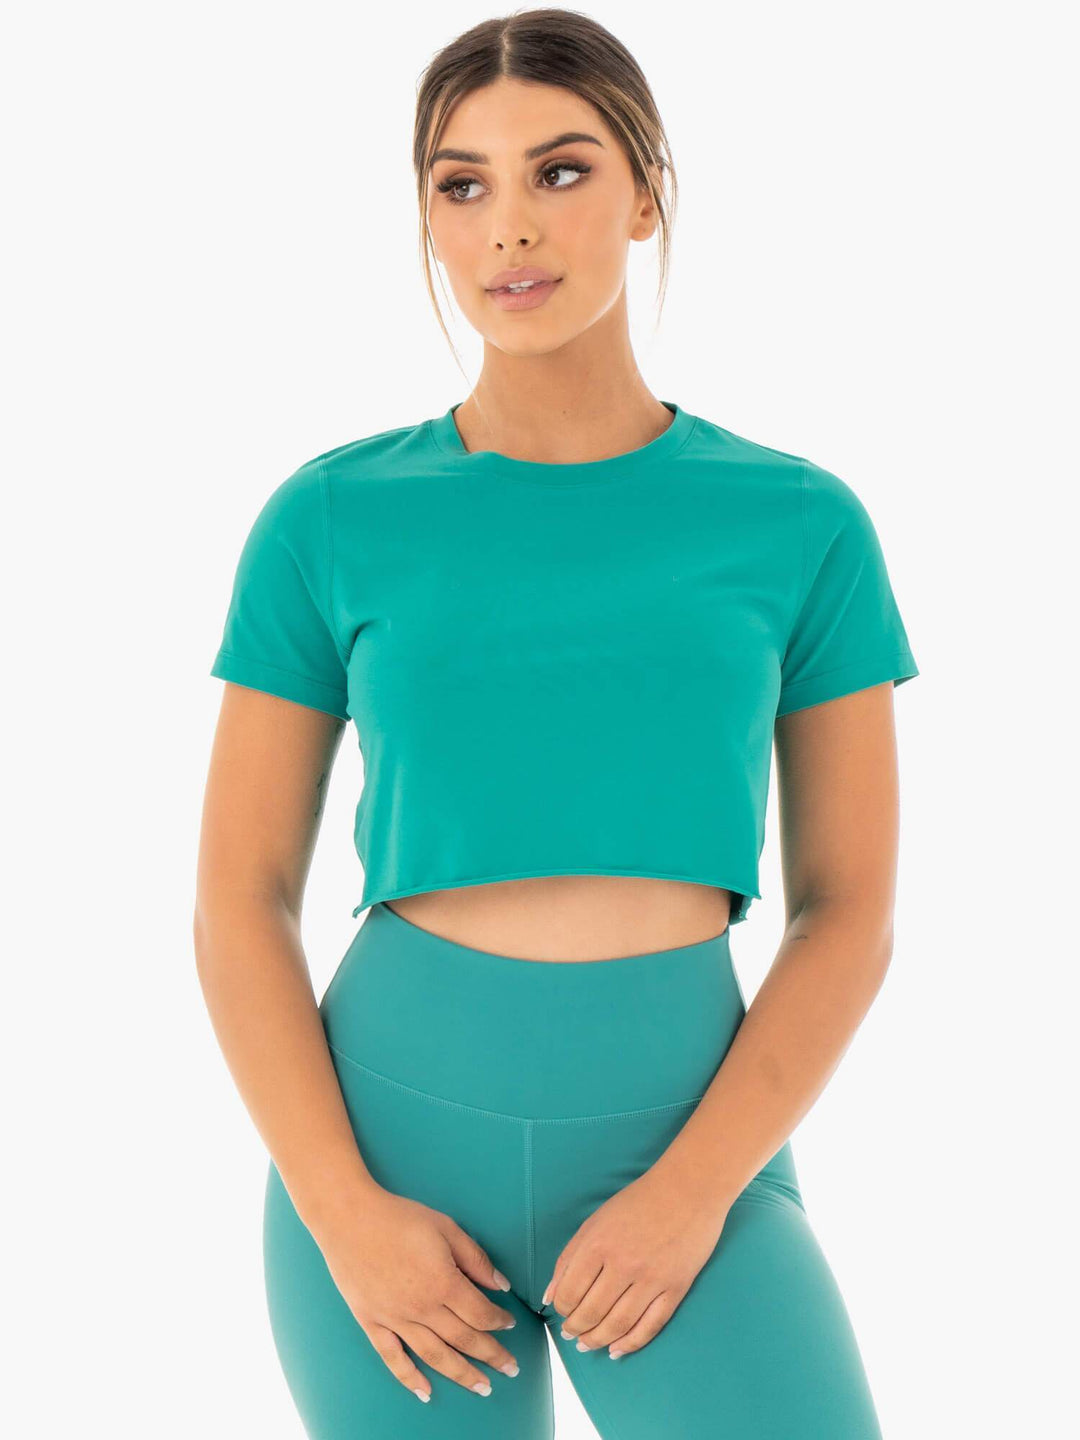 Motion Cropped T-Shirt - Teal Clothing Ryderwear 